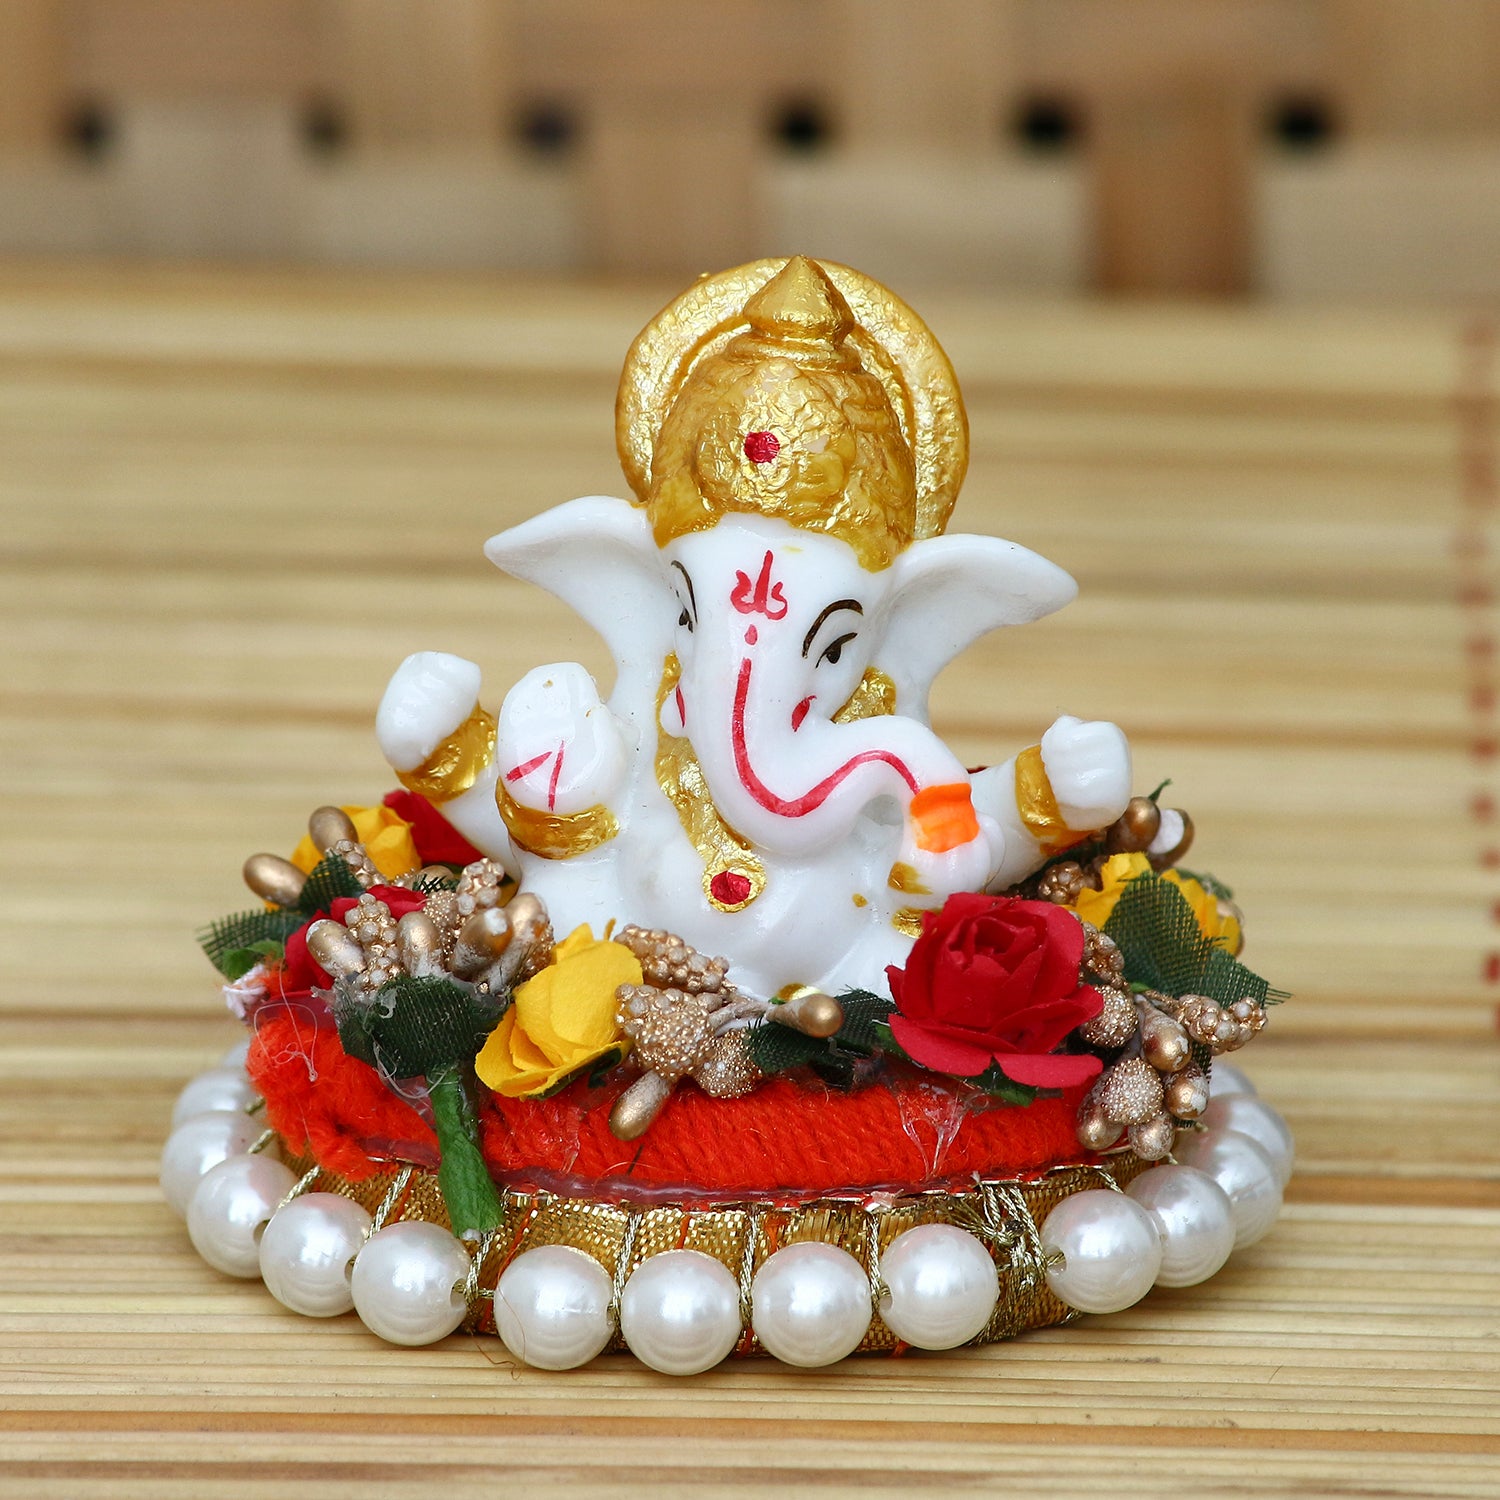 Polyresin Lord Ganesha Statue on Decorative Handcrafted Plate for Home, Office and Car Dashboard 3